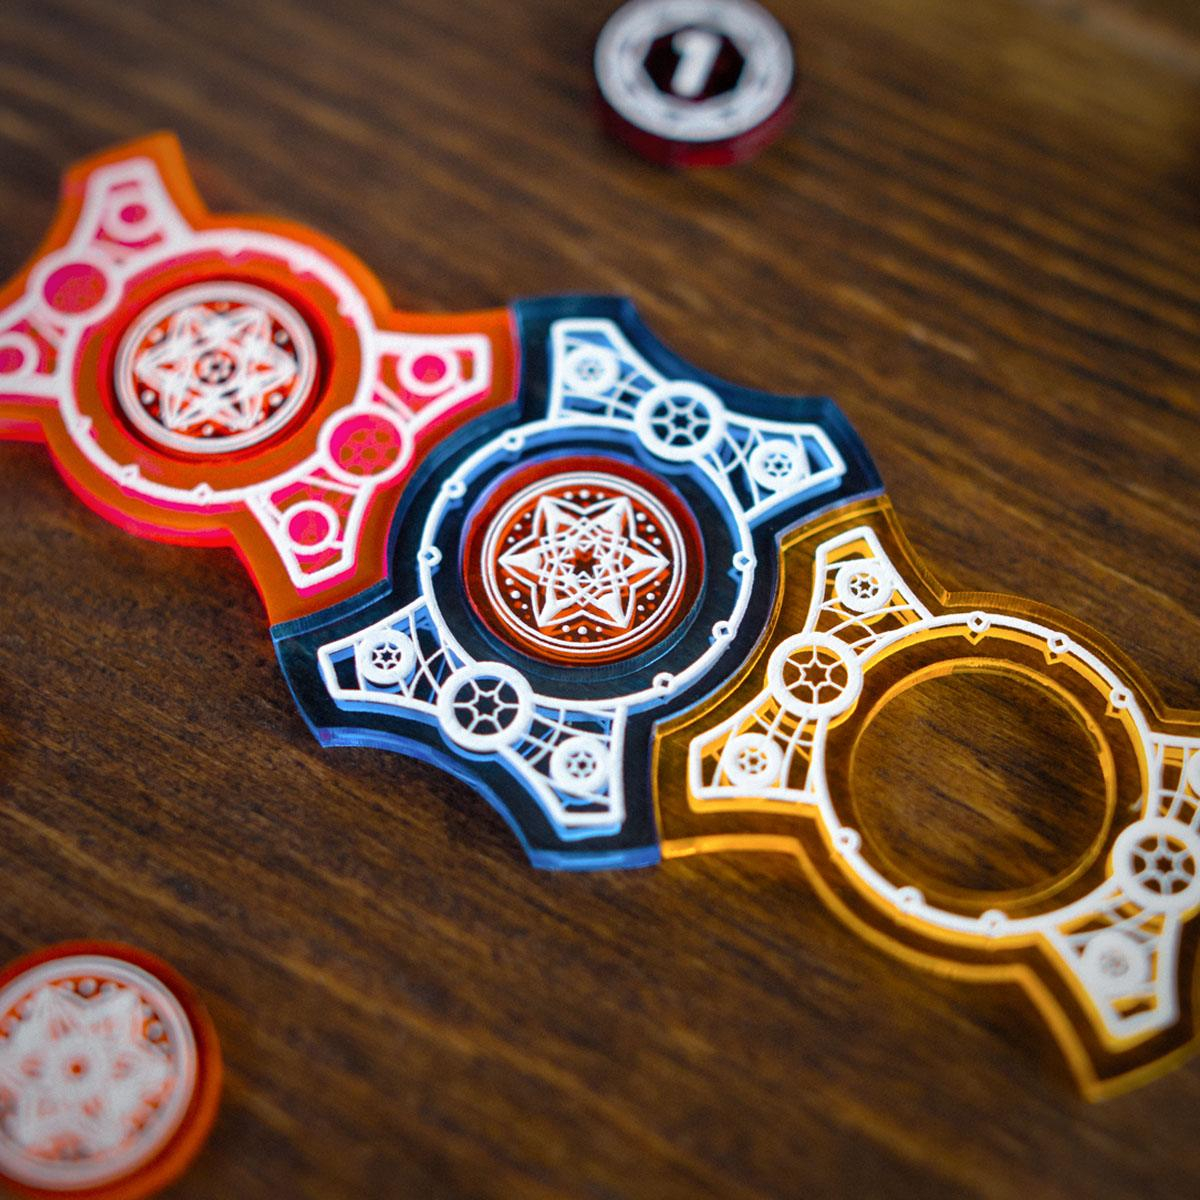 Close up of the Red, Blue, and Yellow Primary Set Keys with the Red Key and Blue Key containing Amber tokens in their centers